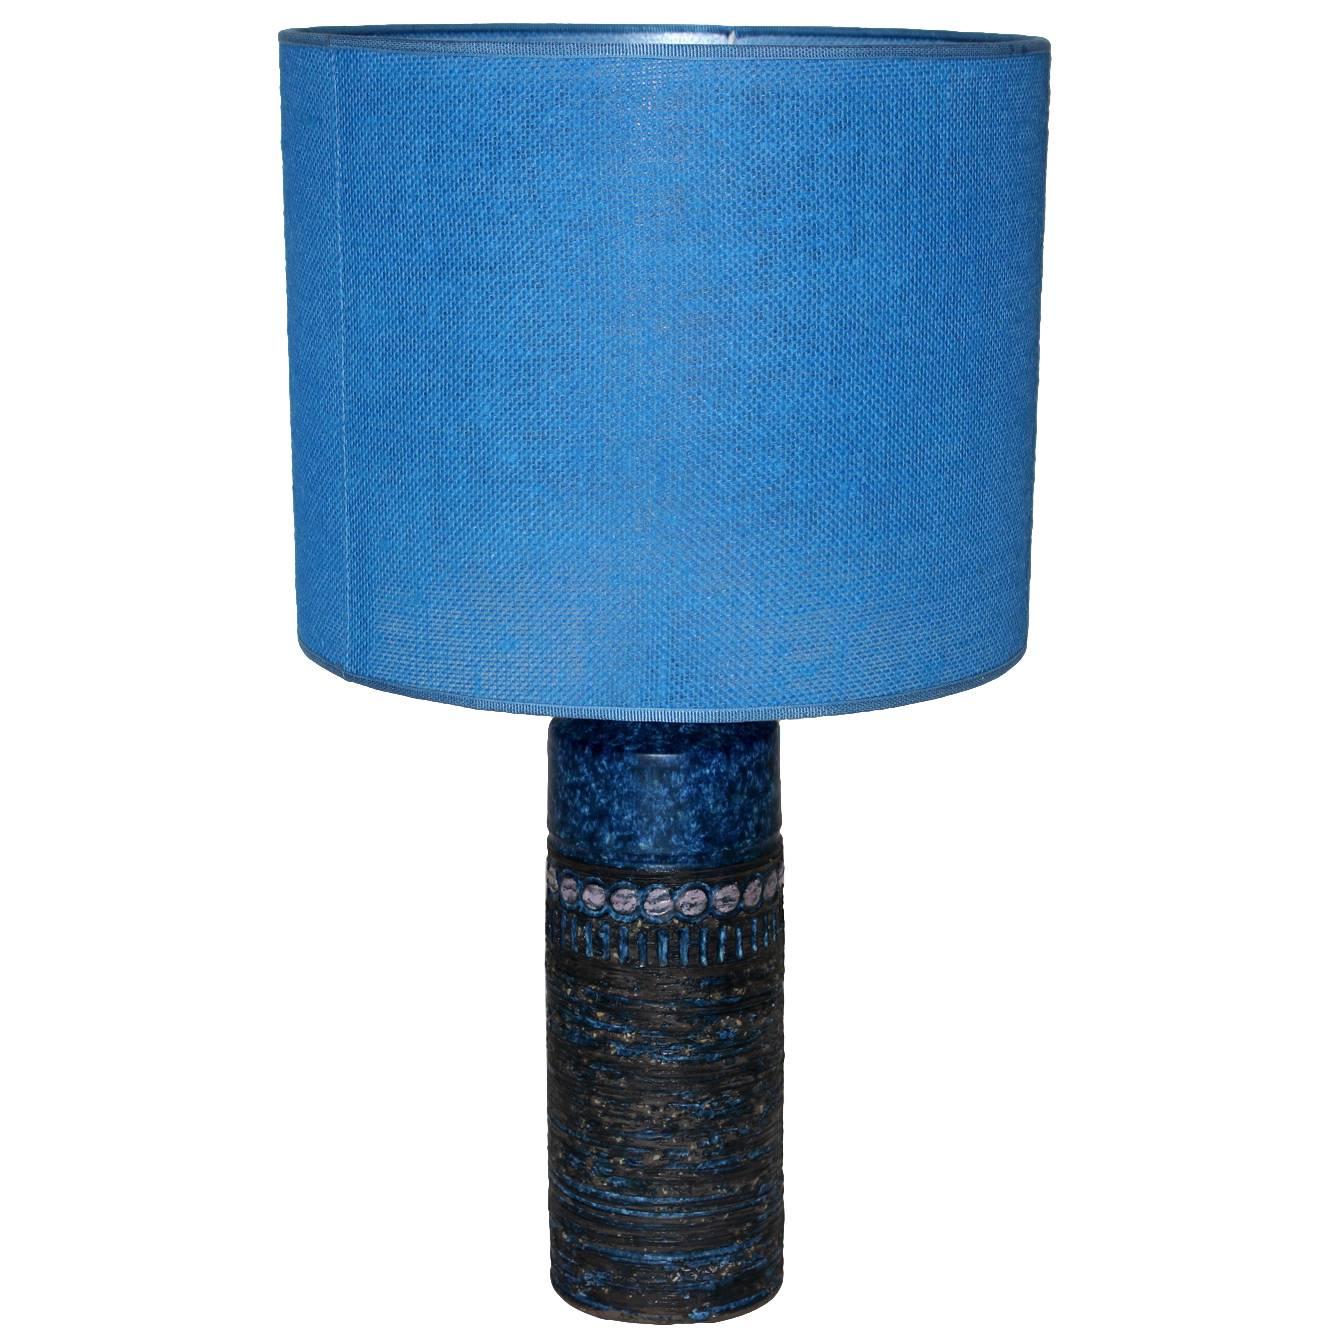 Blue Mid Century Modern Ceramic Table Lamp by Norrmans-Motola Finland circa 1960 For Sale